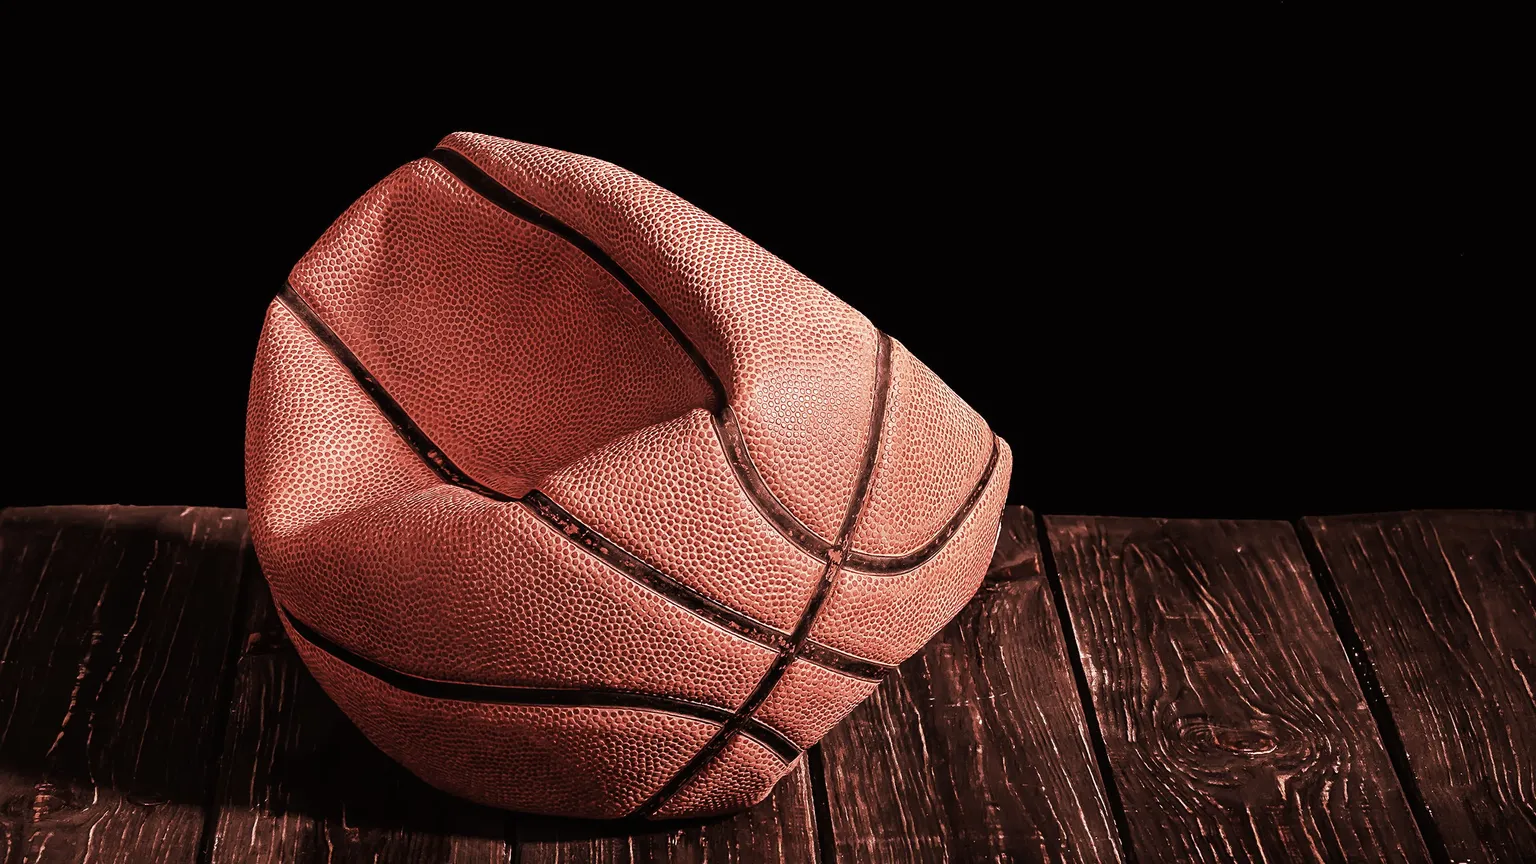 Deflated and rumpled old ball on a wooden floor. Black background.